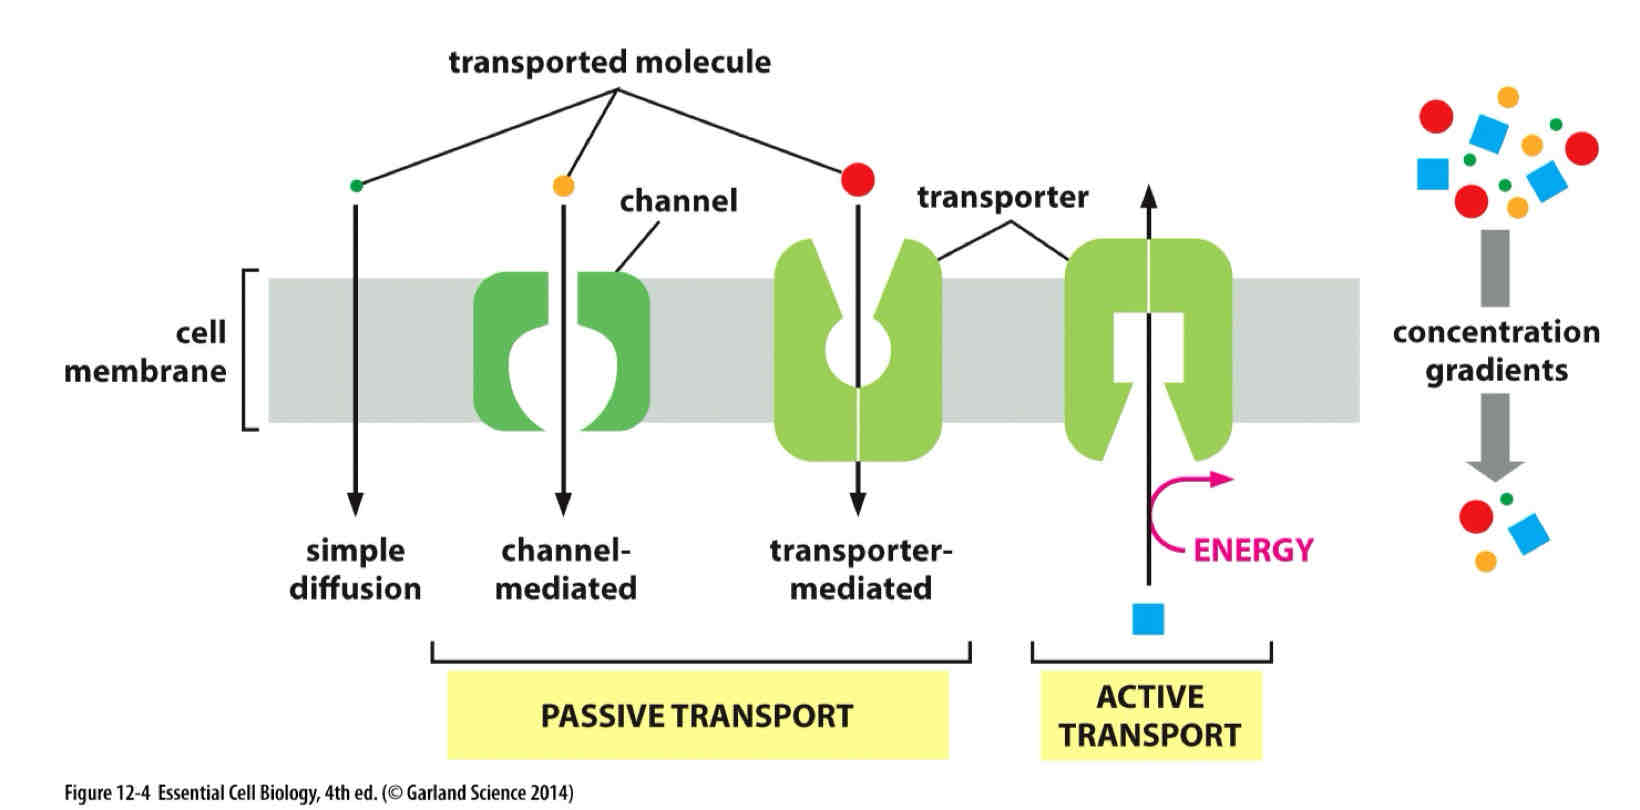 <p>Transporters and channels.</p><p><u>Transporters</u></p><ul><li><p>Transfer only those molecules or ions that fit into specific binding sites </p></li><li><p>Great specificity- often just one type of molecule </p></li><li><p><strong>Conformational change</strong></p></li></ul><p><u>Channels</u></p><ul><li><p>Mainly on the basis of size and electric charge </p></li><li><p>Molecule or ion that is small enough and carries the appropriate charge can pass through without conformational change </p></li><li><p>Selectivity and the rapid transport of ions</p></li></ul>